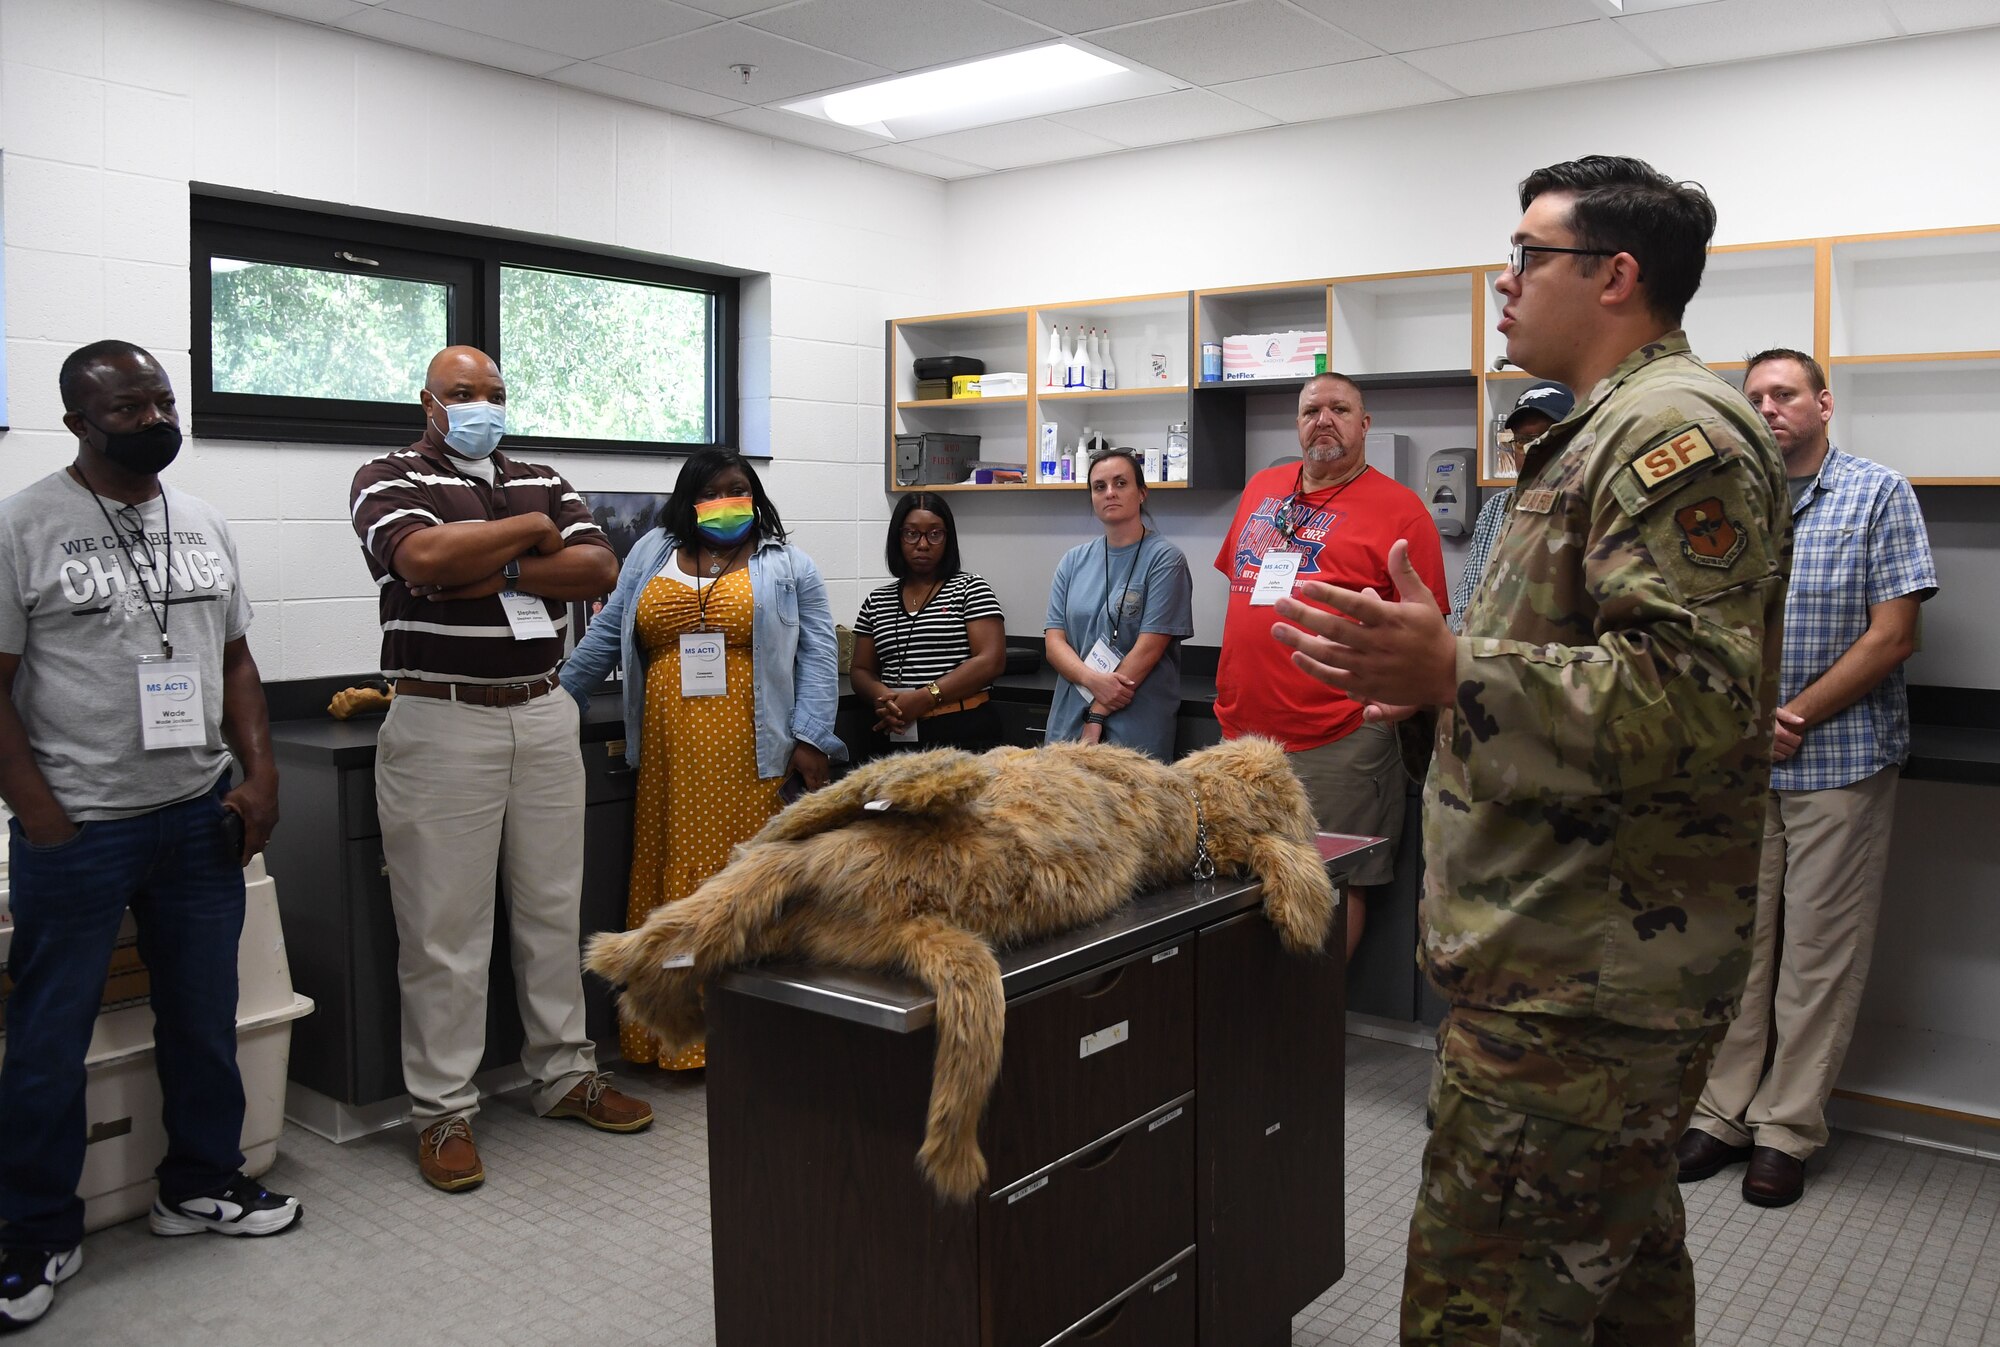 U.S. Air Force Staff Sgt. Cody Garton, 81st Security Forces Squadron military working dog handler, provides a tour inside the K-9 kennel during the Mississippi Educators Tour for Law and Public Safety and Fire Science tour at Keesler Air Force Base, Mississippi, July 27, 2022. More than 30 educators also toured the Keesler Fire Department and received an 81st SFS virtual reality training demonstration. (U.S. Air Force photo by Kemberly Groue)